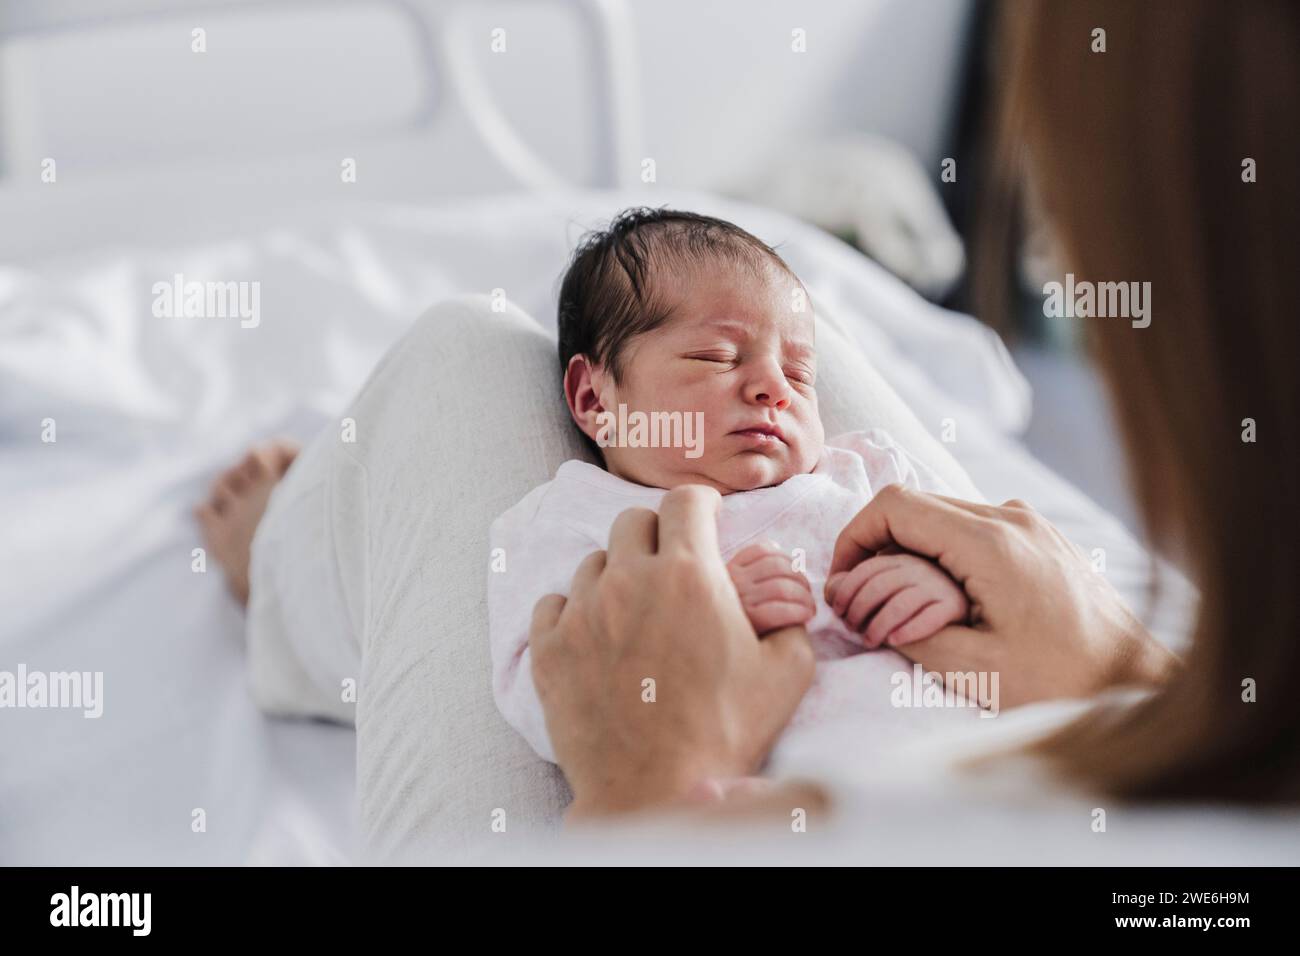 Cute baby girl sleeping on mother's lap in hospital Stock Photo